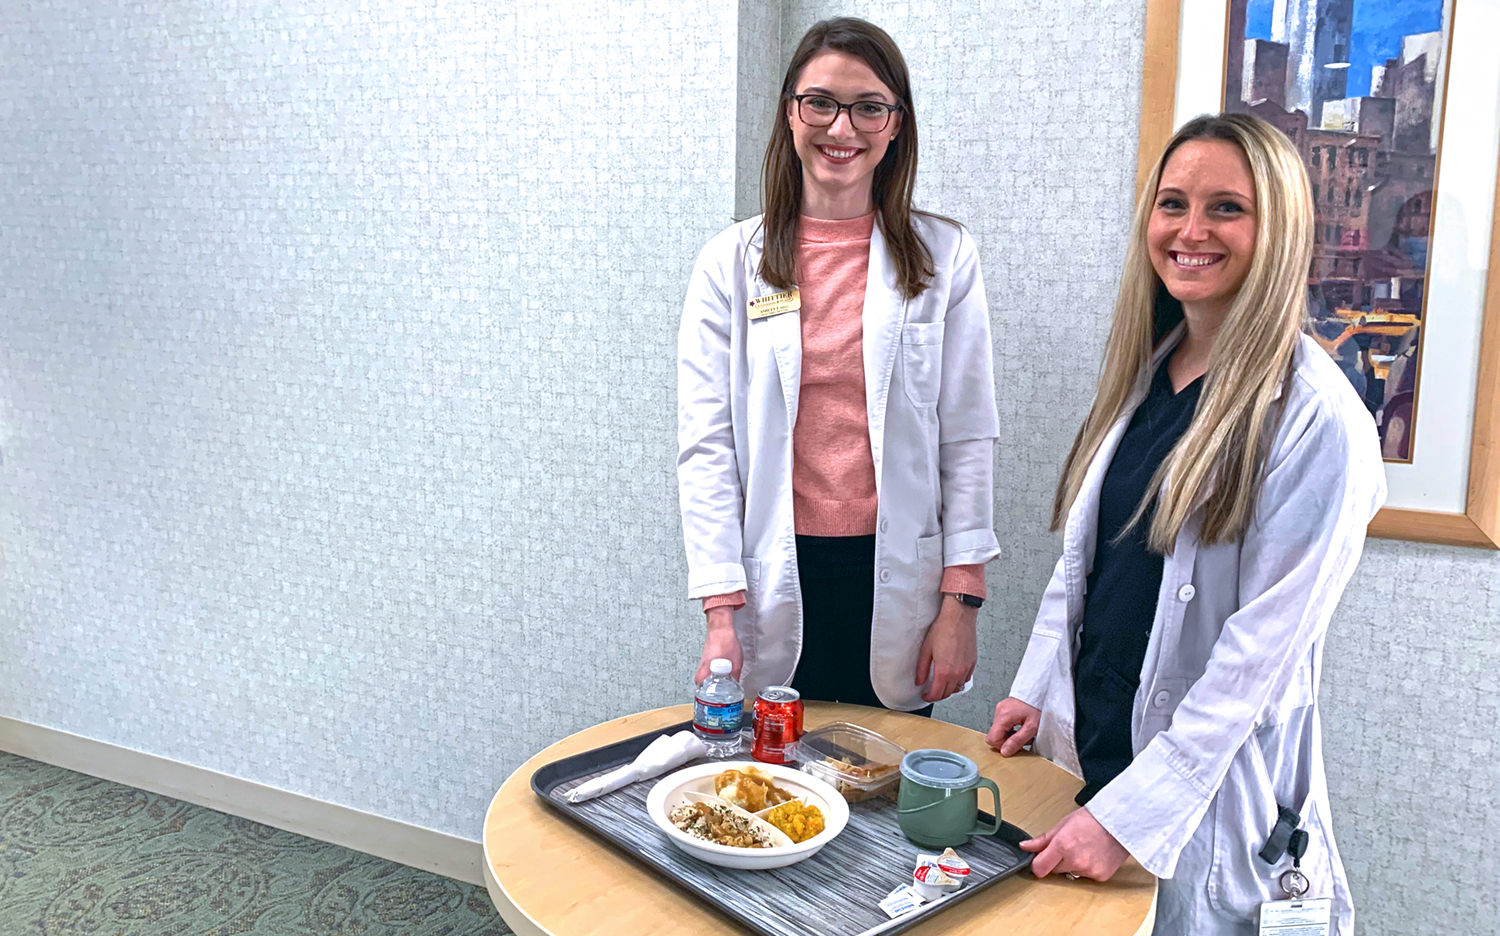 A Dietitian and a Speech-Language Pathologist at Whittier Rehabilitation Hospital Bradford explain how they work closely together to tailor dietary needs to care for our compromised patients: “It’s a balance between keeping people safe but also piquing their interest in food.”